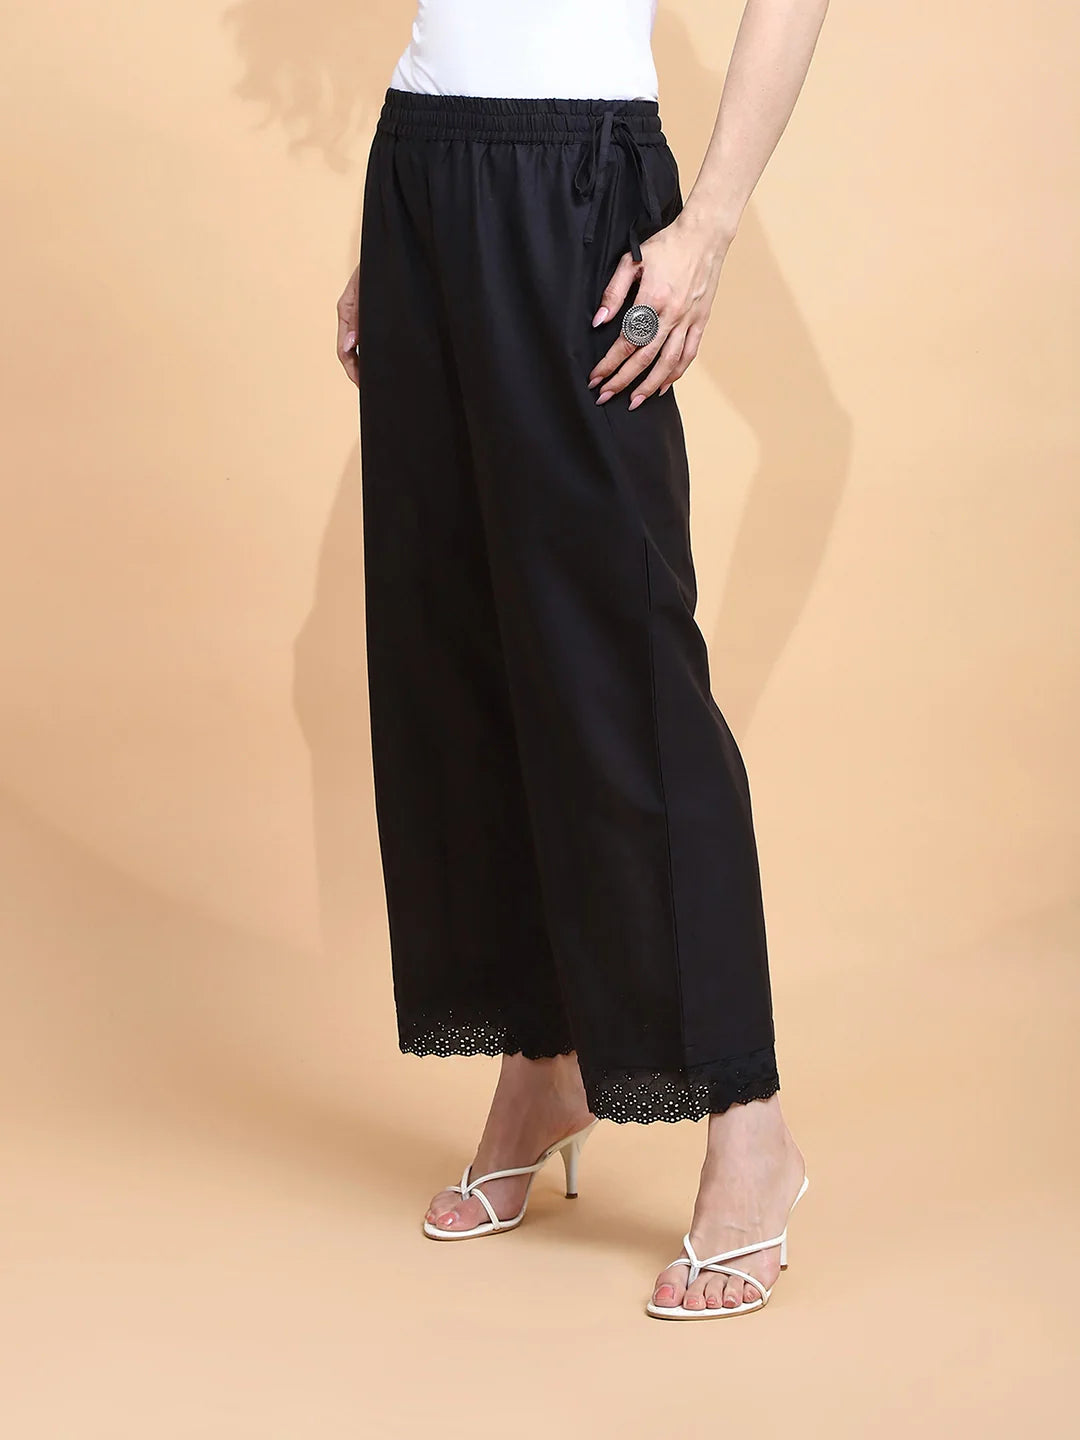 Black Cotton Loose Fit Palazzo For Women